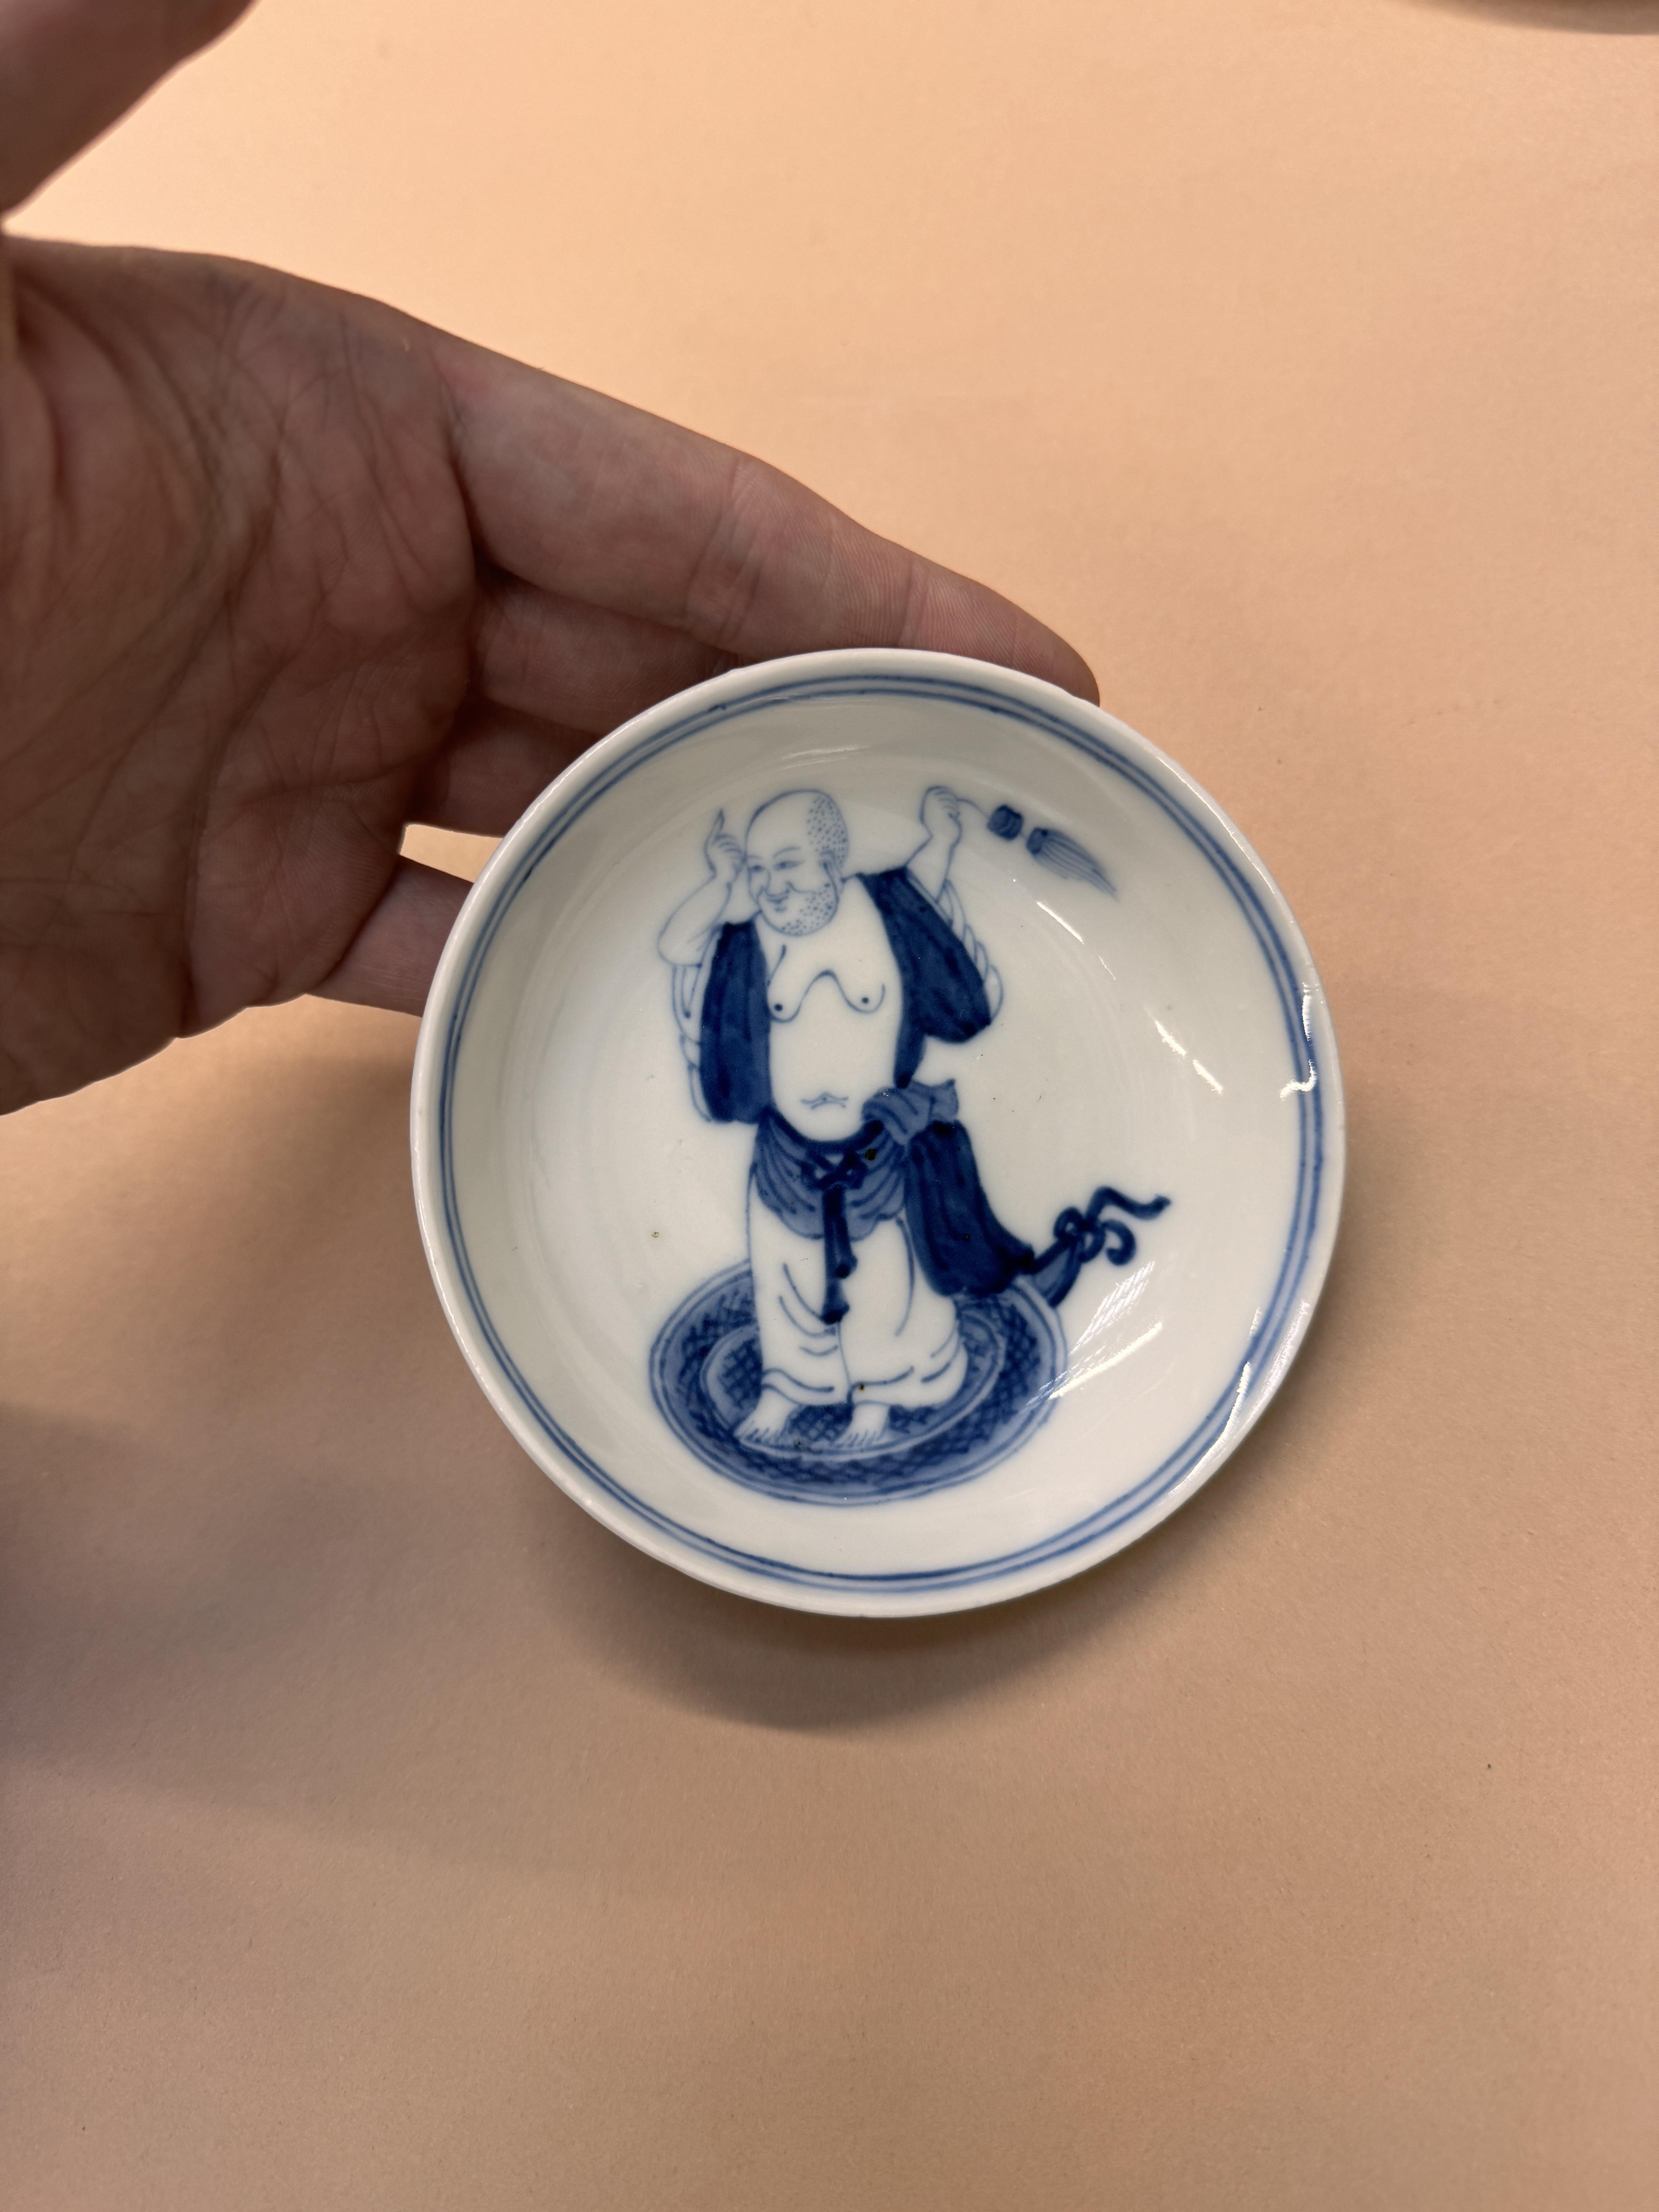 A CHINESE BLUE AND WHITE 'MONK' DISH 清康熙 青花人物圖紋盤 - Image 2 of 9